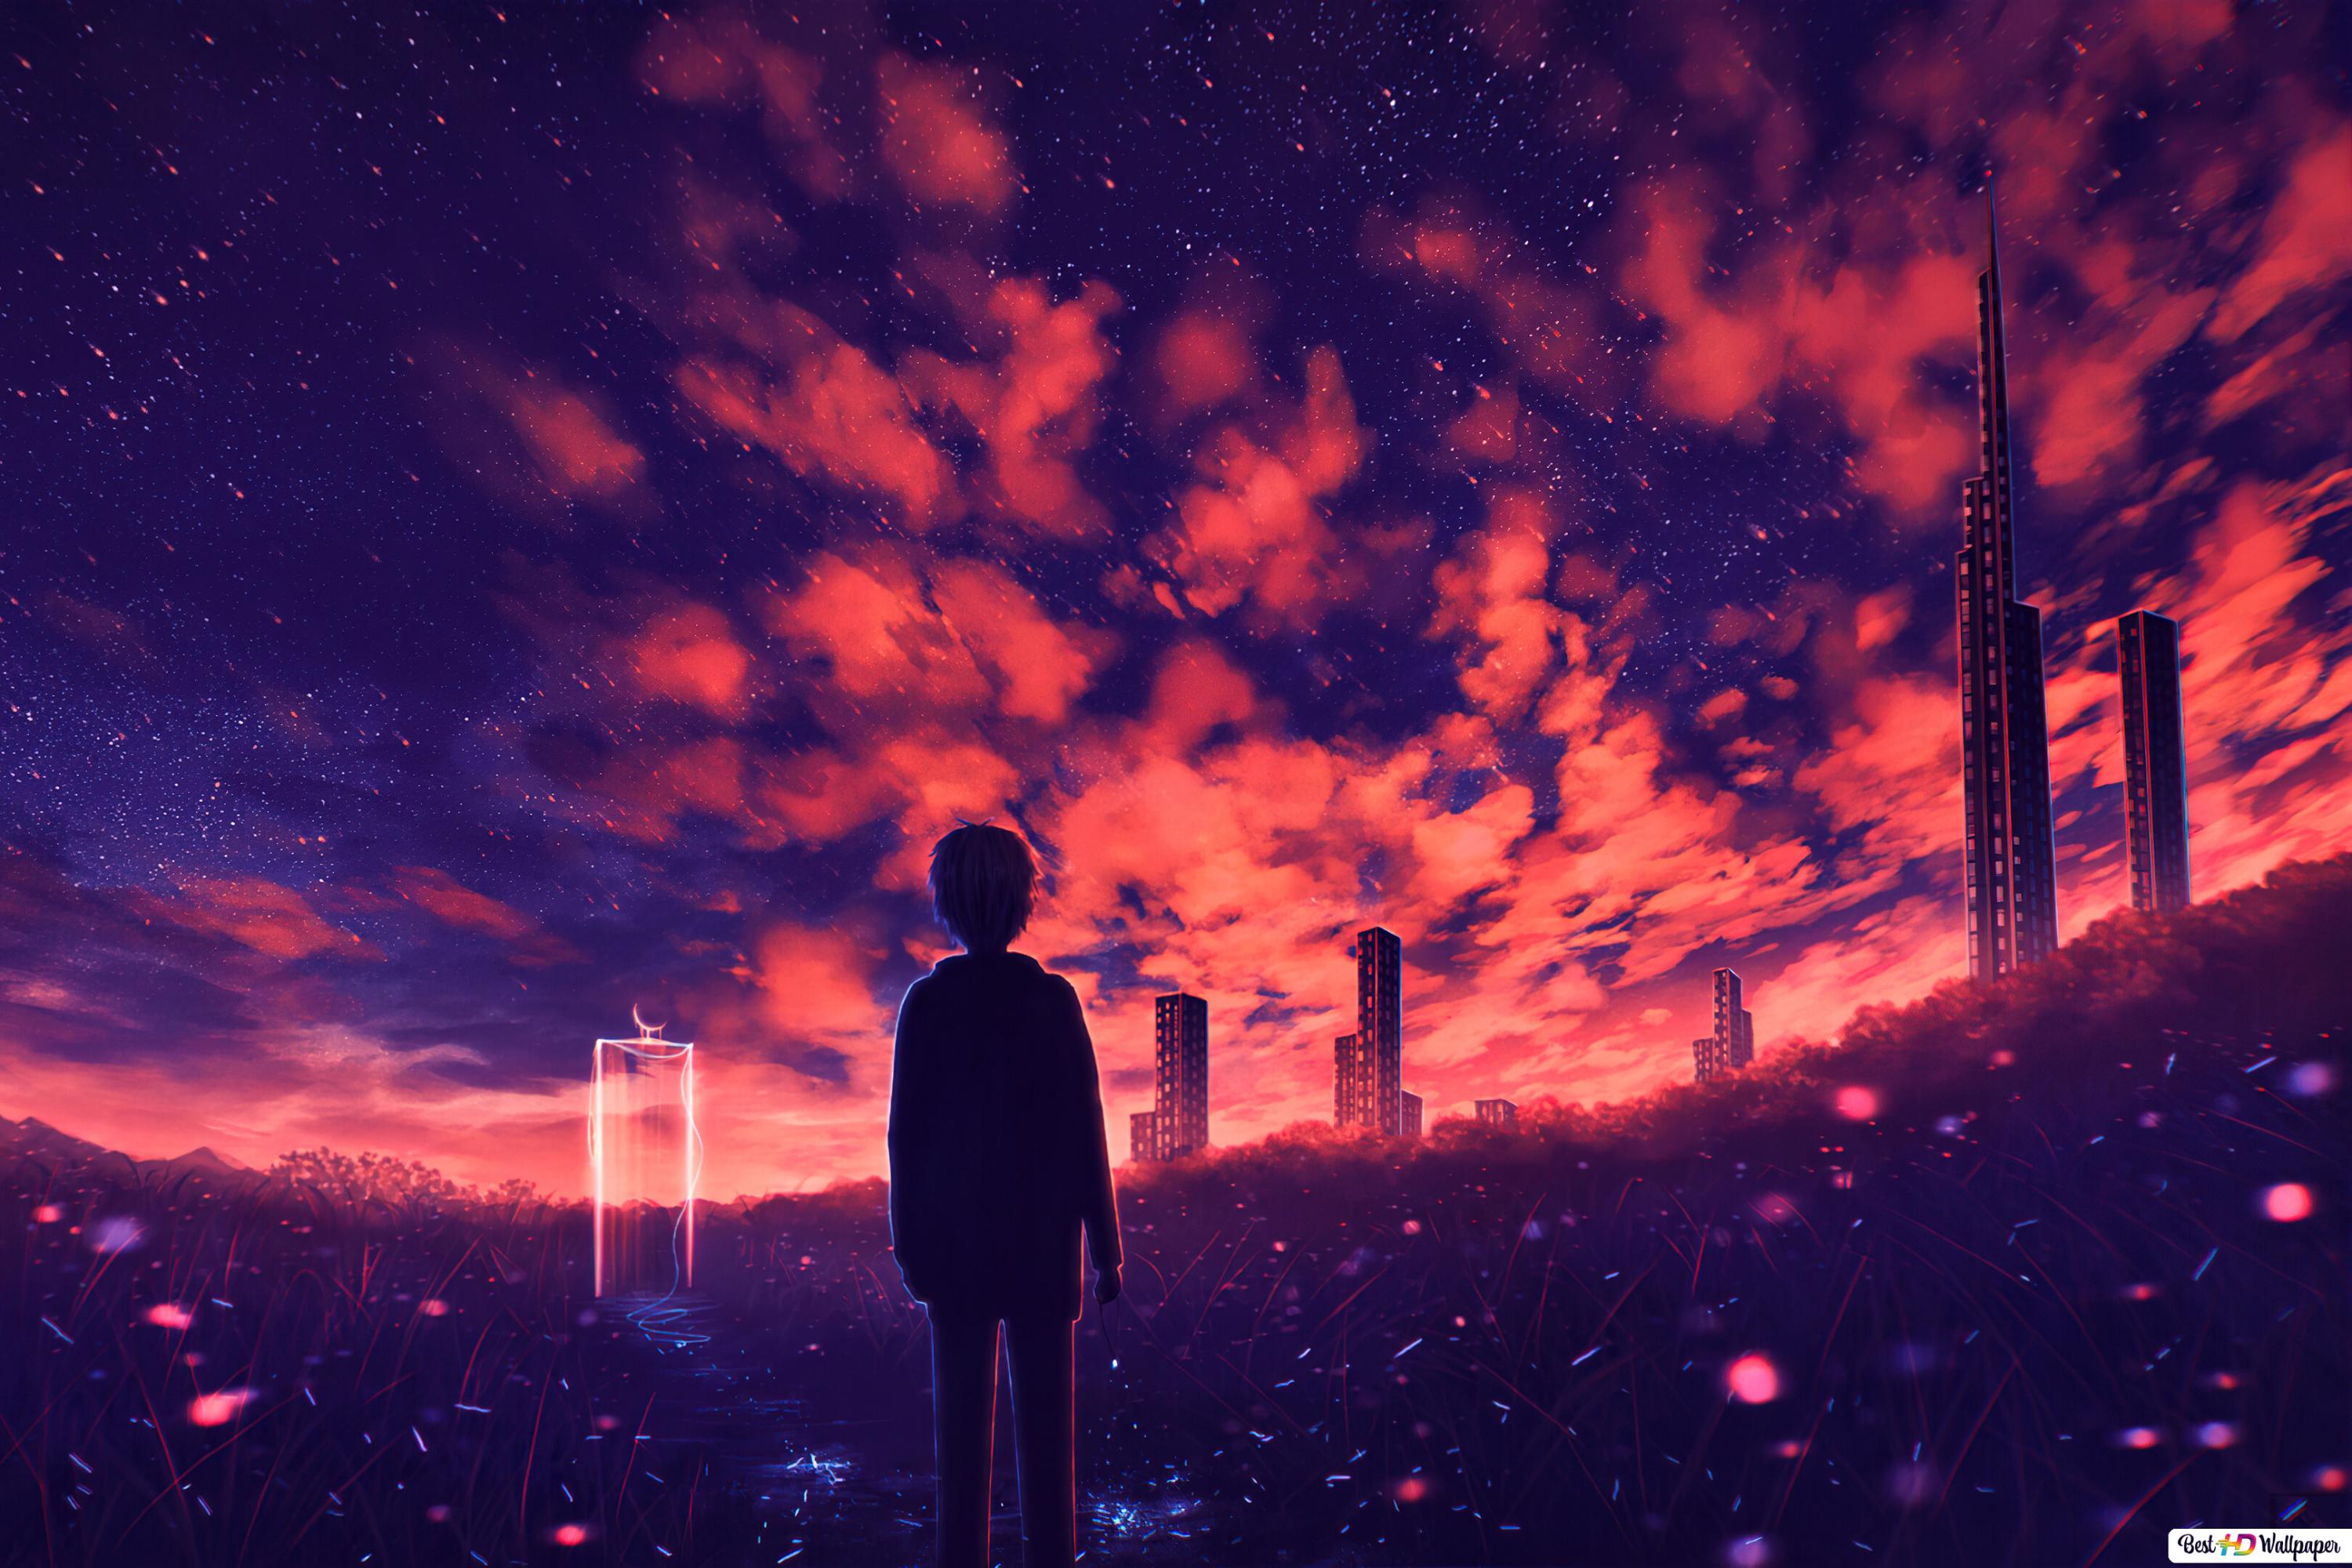 Alone Anime PC Wallpapers - Wallpaper Cave